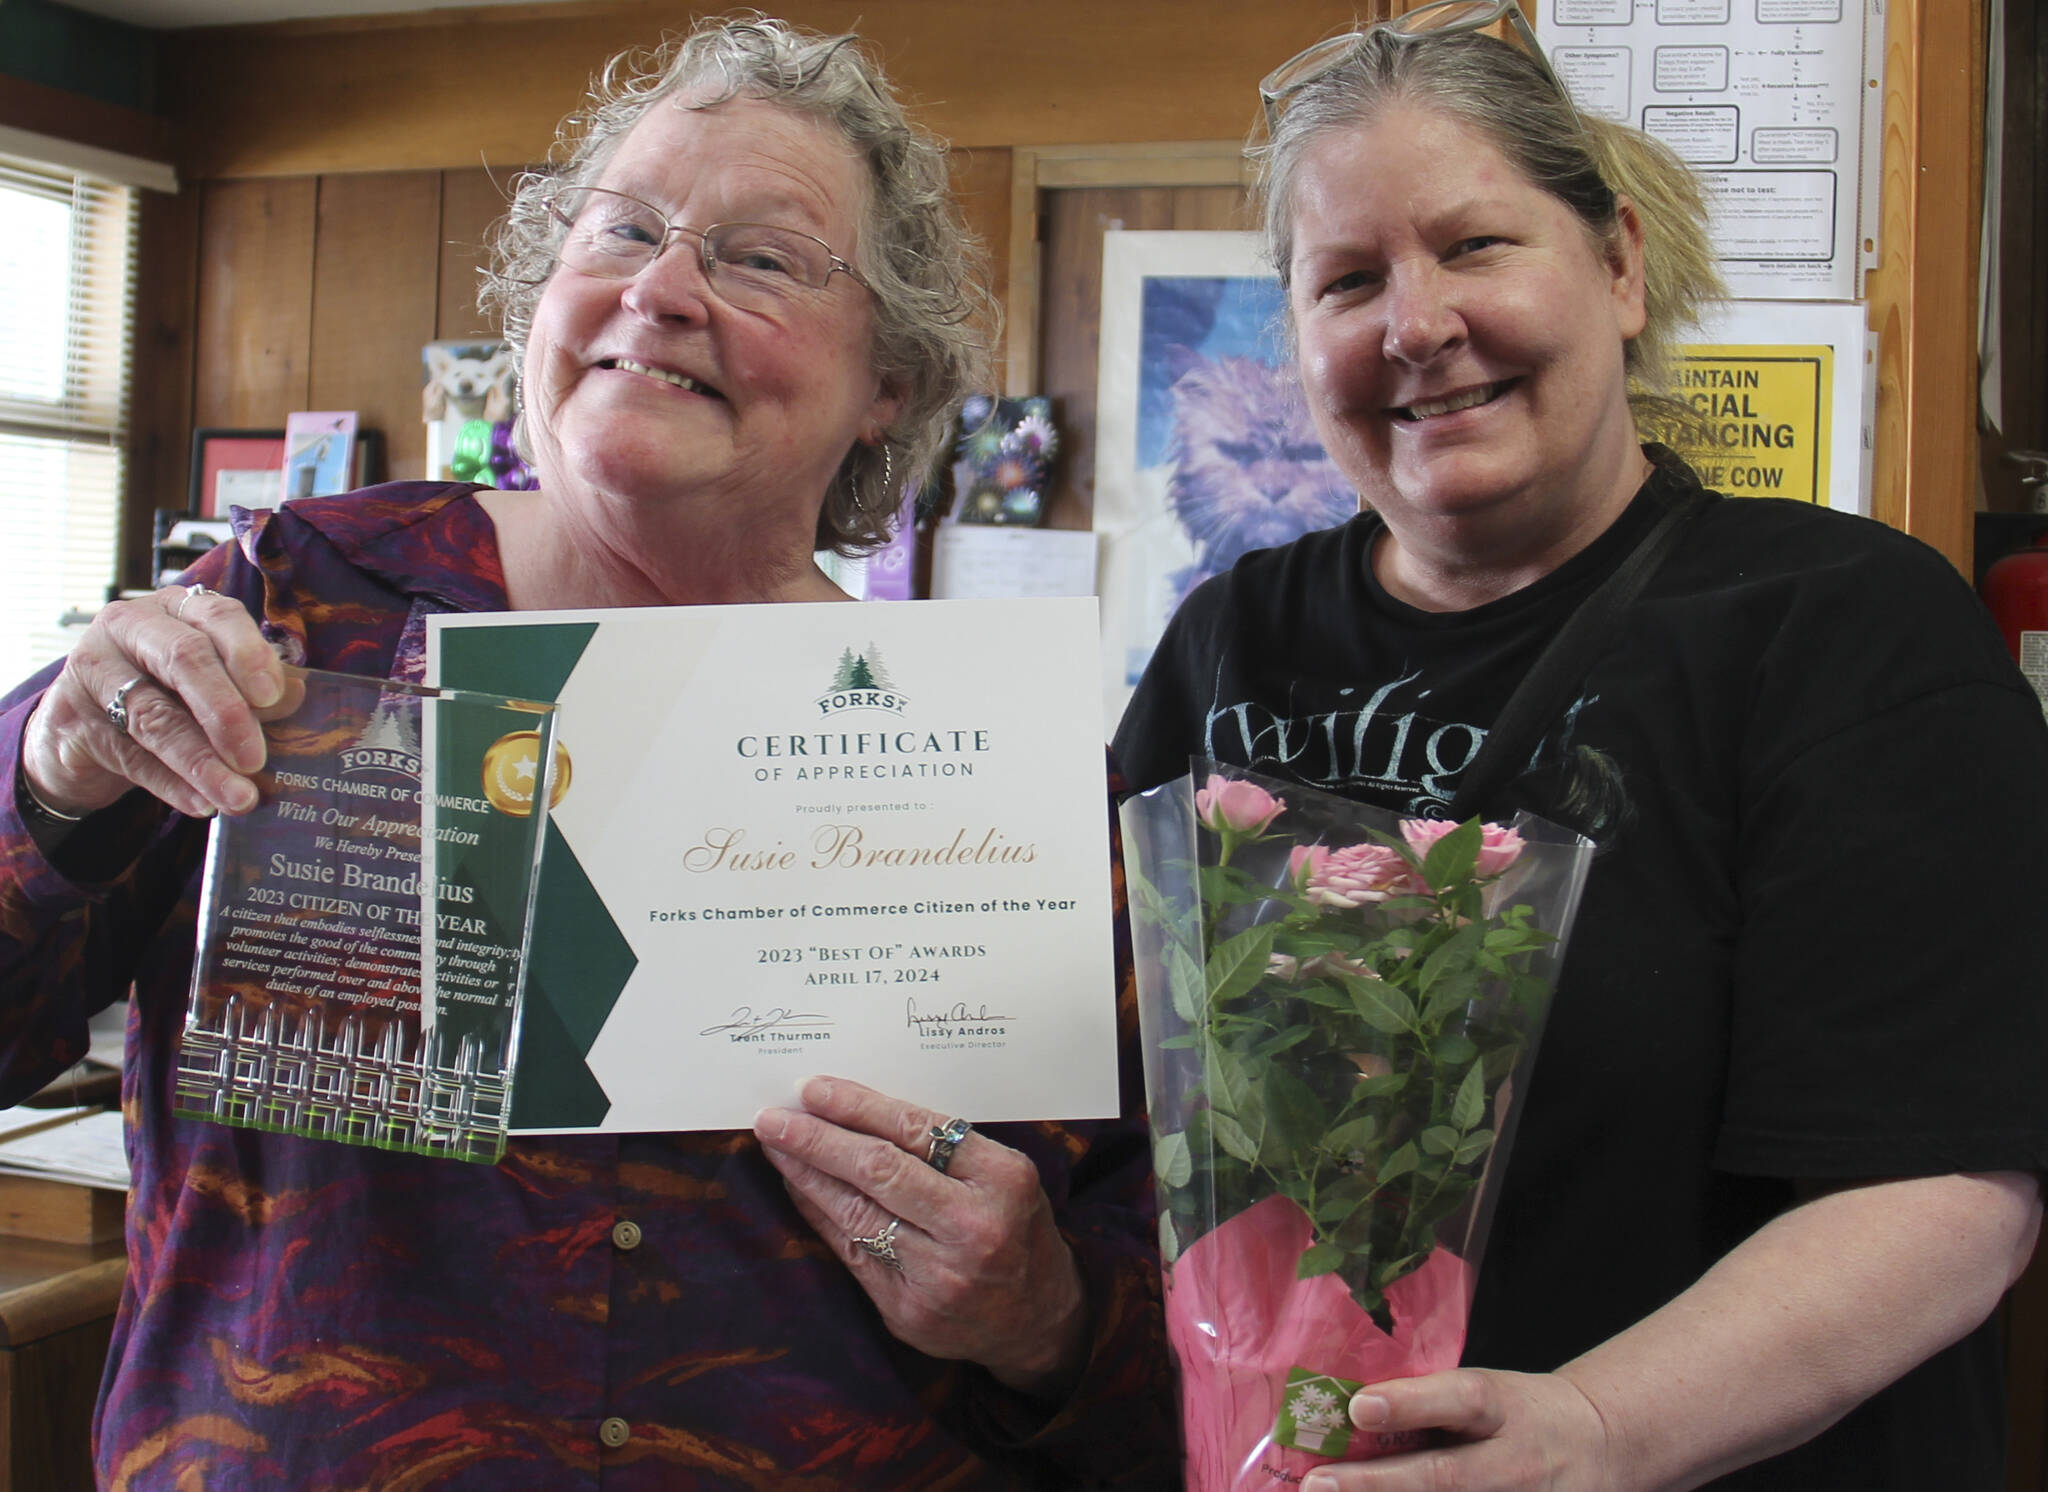 Citizen of the Year Susie Brandelius was unable to attend the Forks Chamber of Commerce Best of Awards event on April 17. She is seen here with the Forks Chamber of Commerce Executive Director, Lissy Andros, who caught up with her on Monday, April 22 at her office to present her award and flowers. Susie was recognized for helping seniors in the community as well as helping with resources for relatives raising relatives and more. Photo Christi Baron